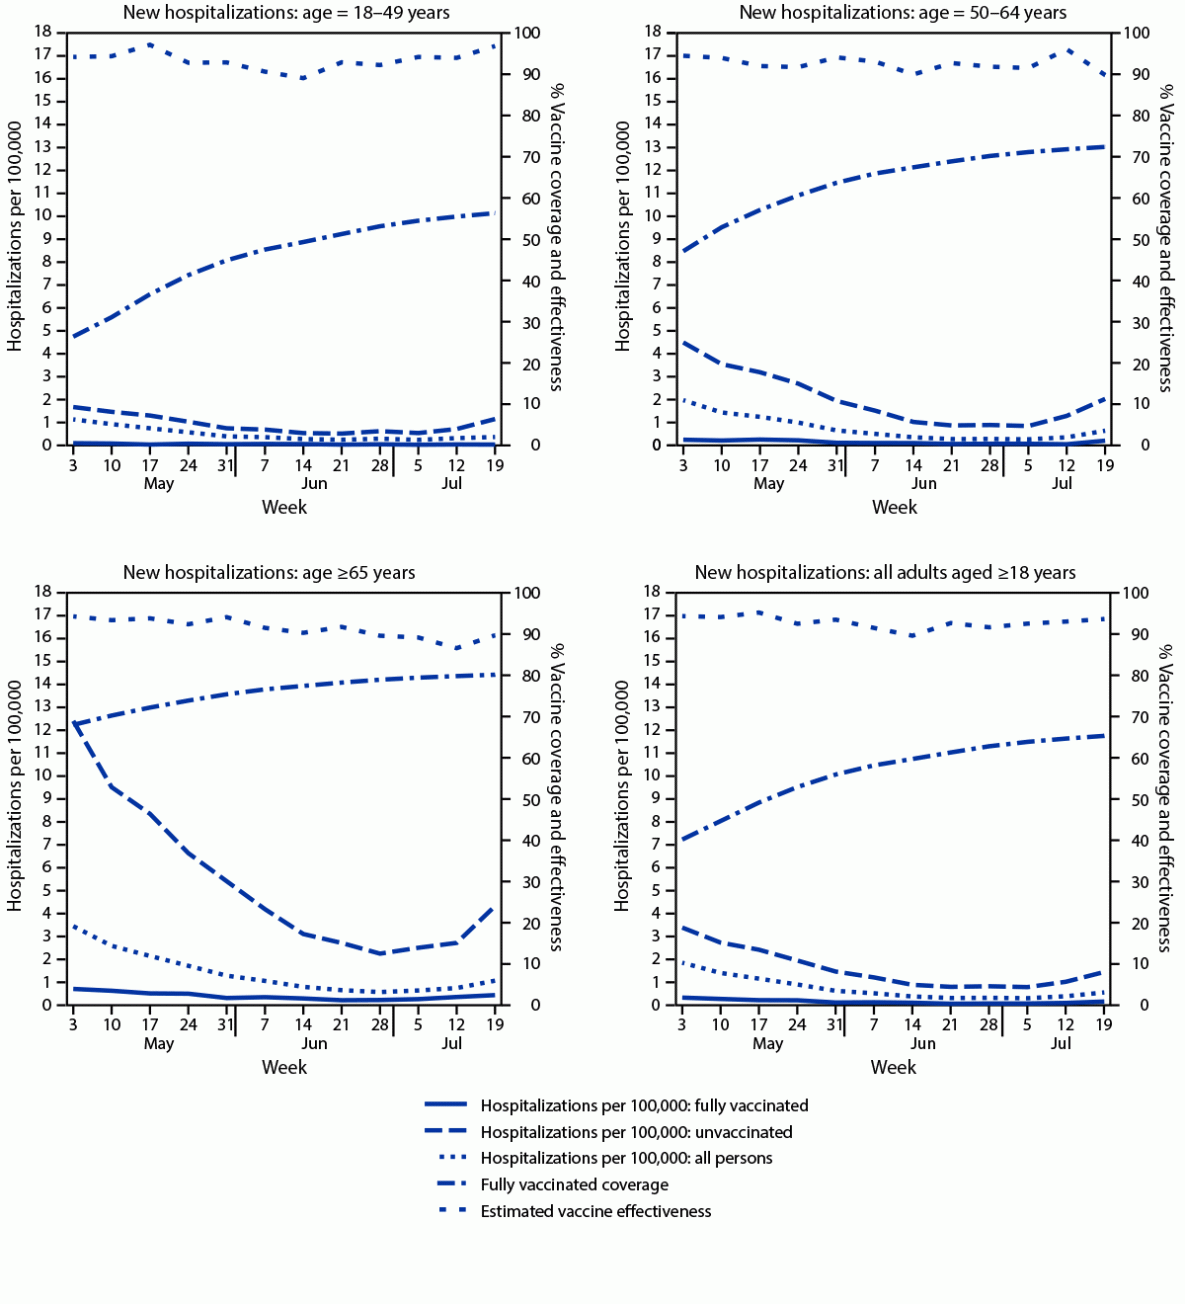 Figure is a series of four panels showing new hospitalizations with laboratory-confirmed COVID-19 among fully vaccinated and unvaccinated adults, vaccine coverage, and estimated vaccine effectiveness, by age in New York during May 3–July 25, 2021.